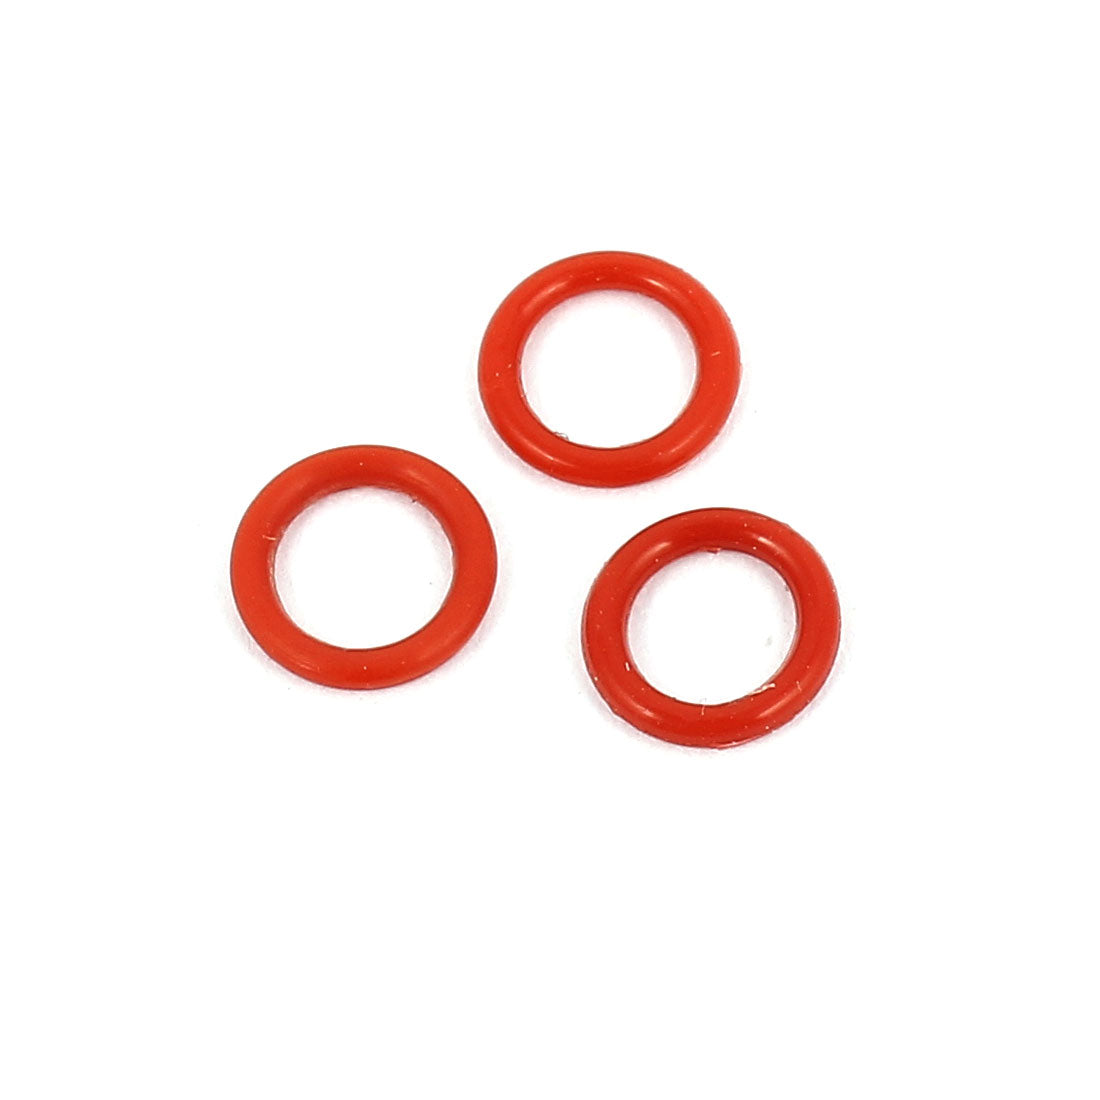 uxcell Uxcell 100Pcs 6mm x 1mm Rubber O-rings NBR Heat Resistant Sealing Ring Grommets Red